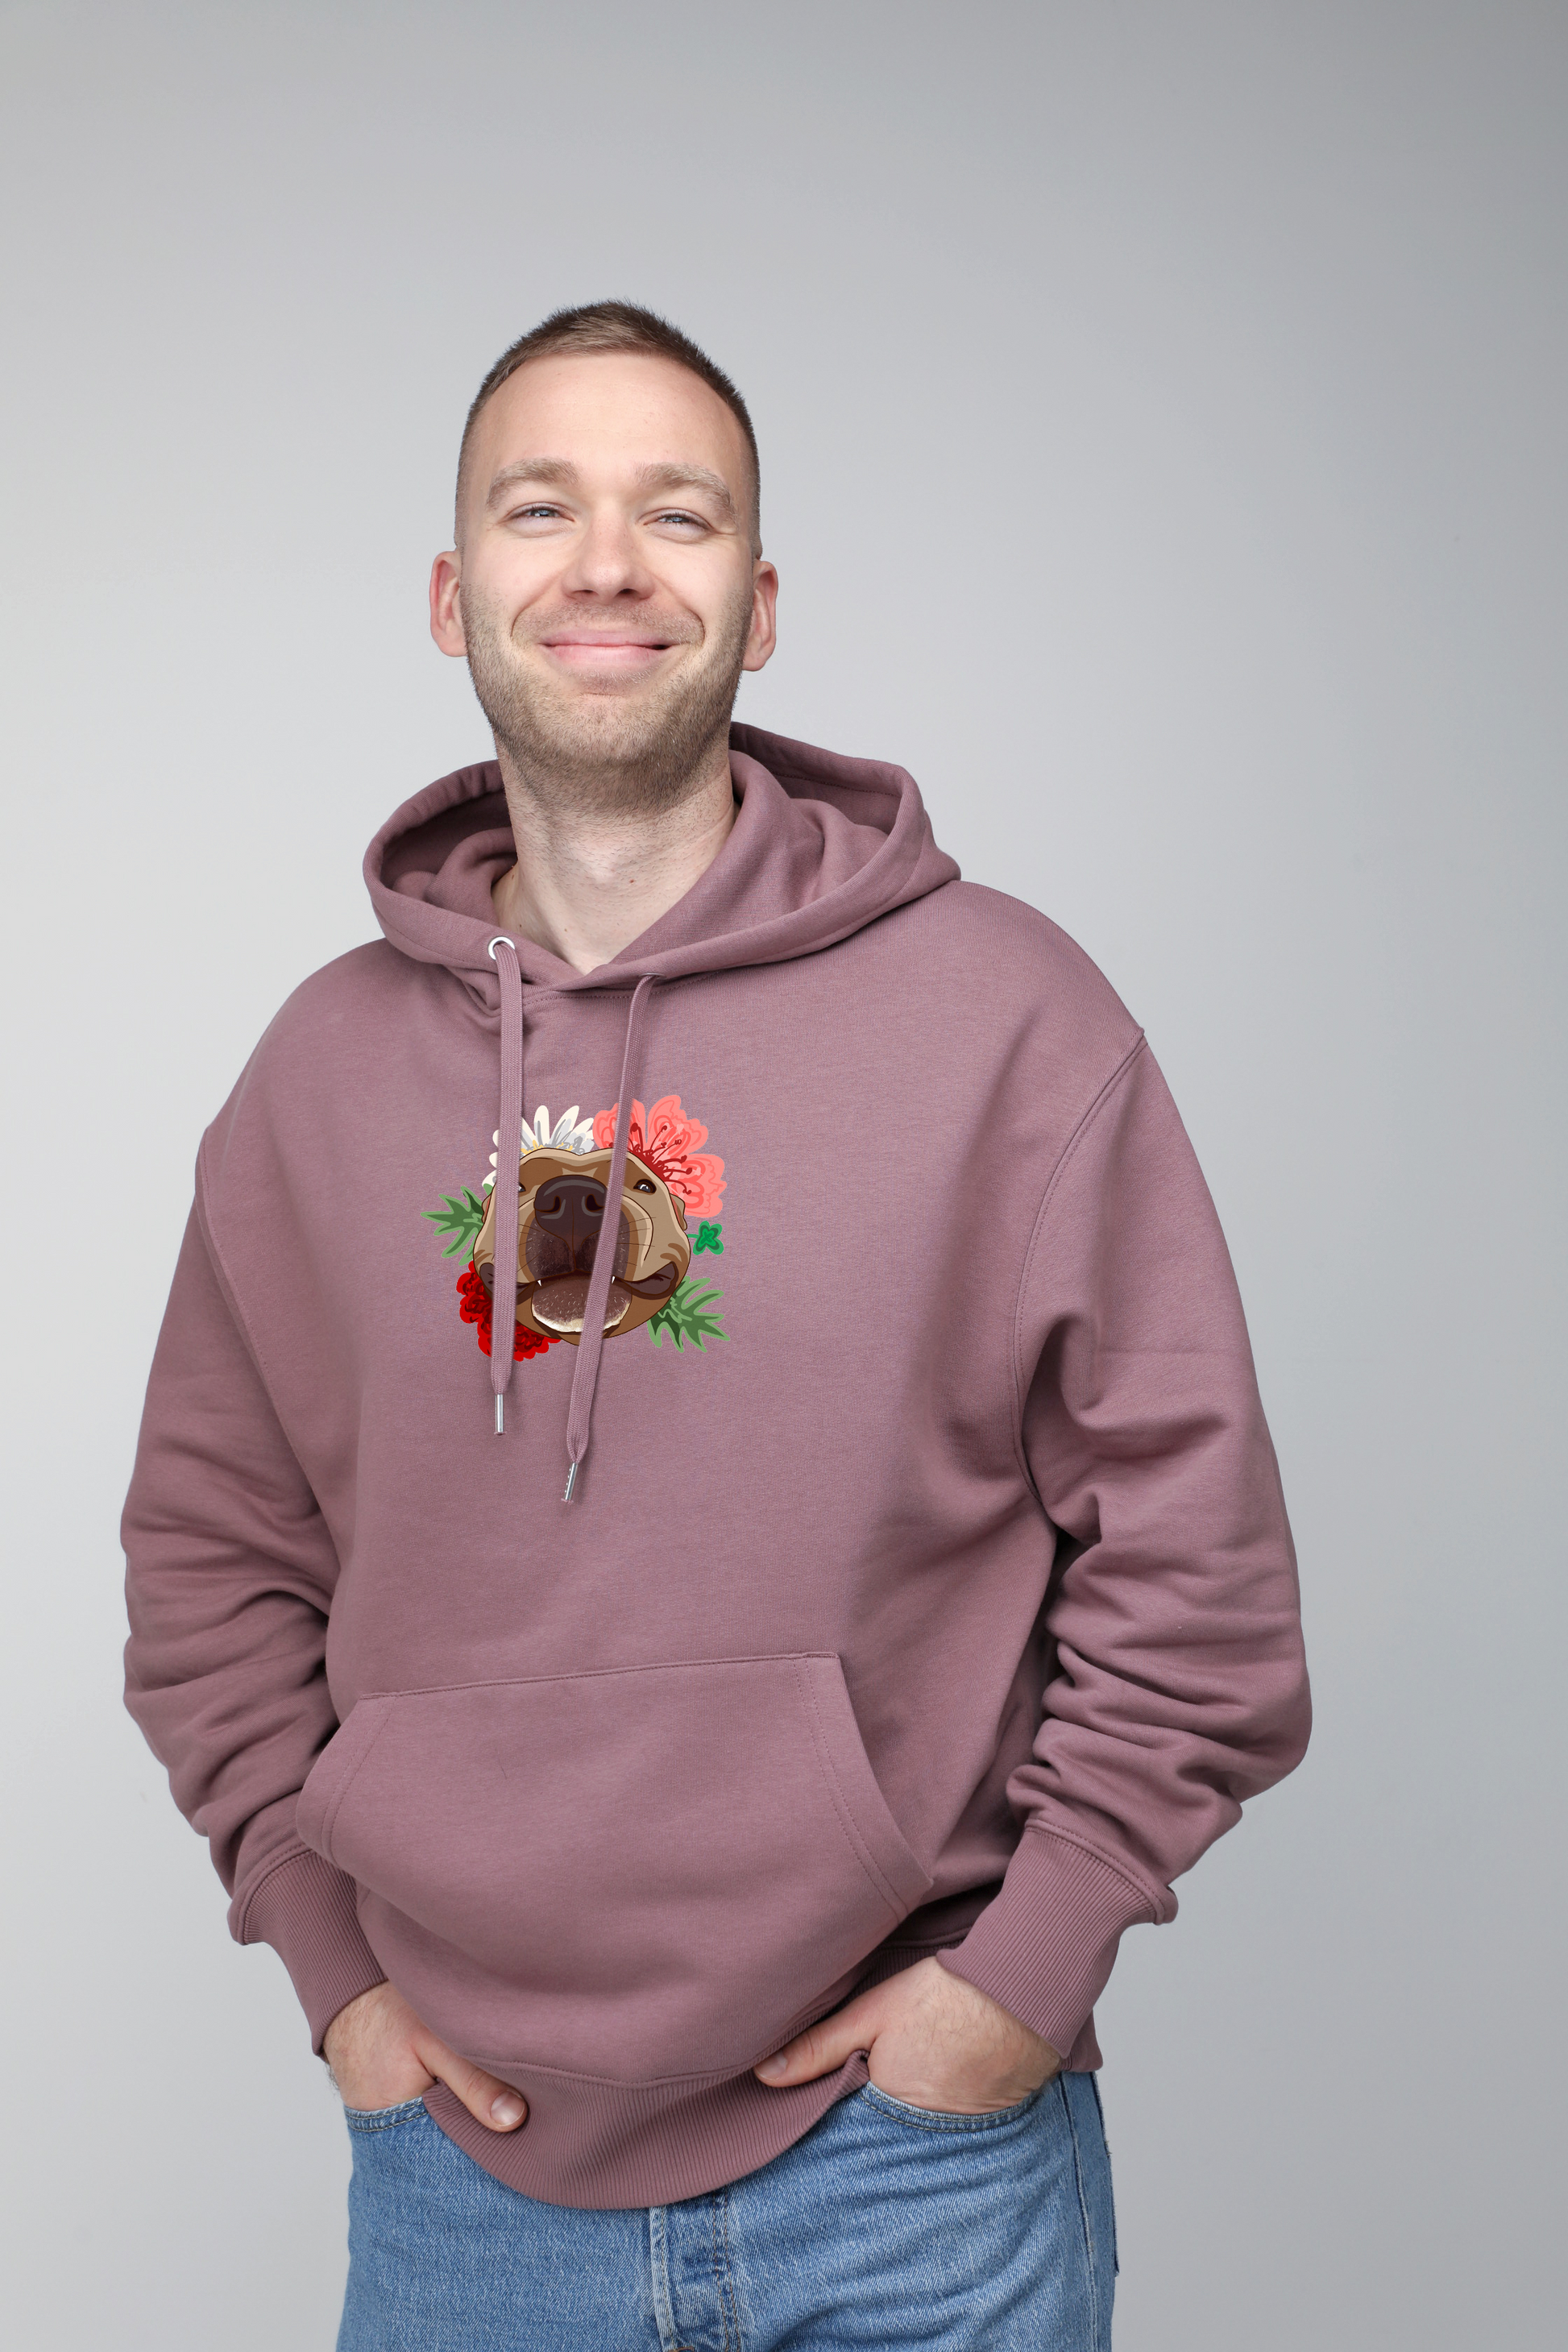 Serious dog with flowers | Hoodie with dog. Oversize fit | Unisex by My Wild Other